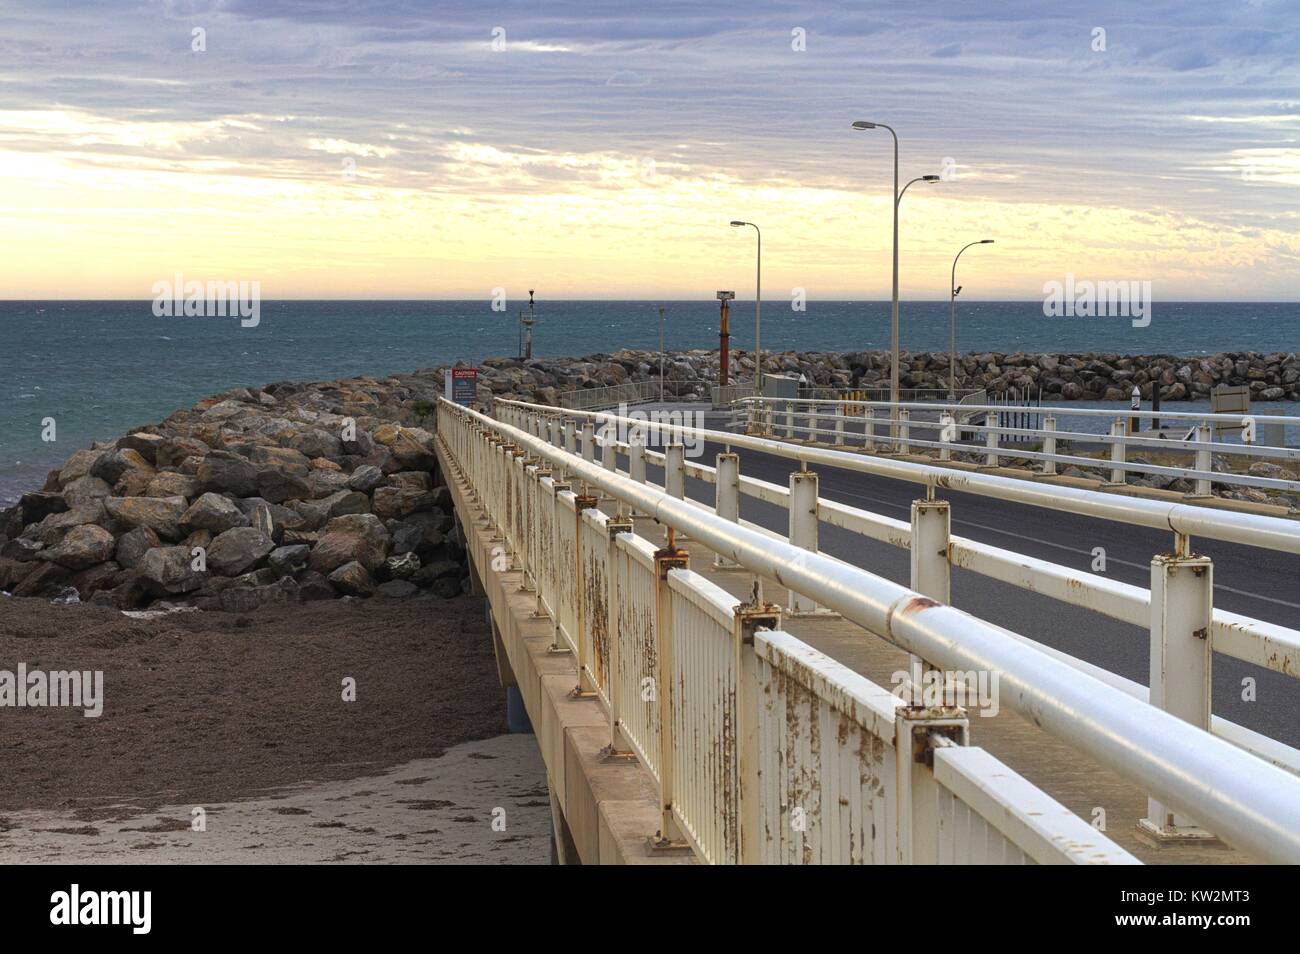 Concrete pier leading out to a rocky breakwater, view of the ocean and sunset. Stock Photo